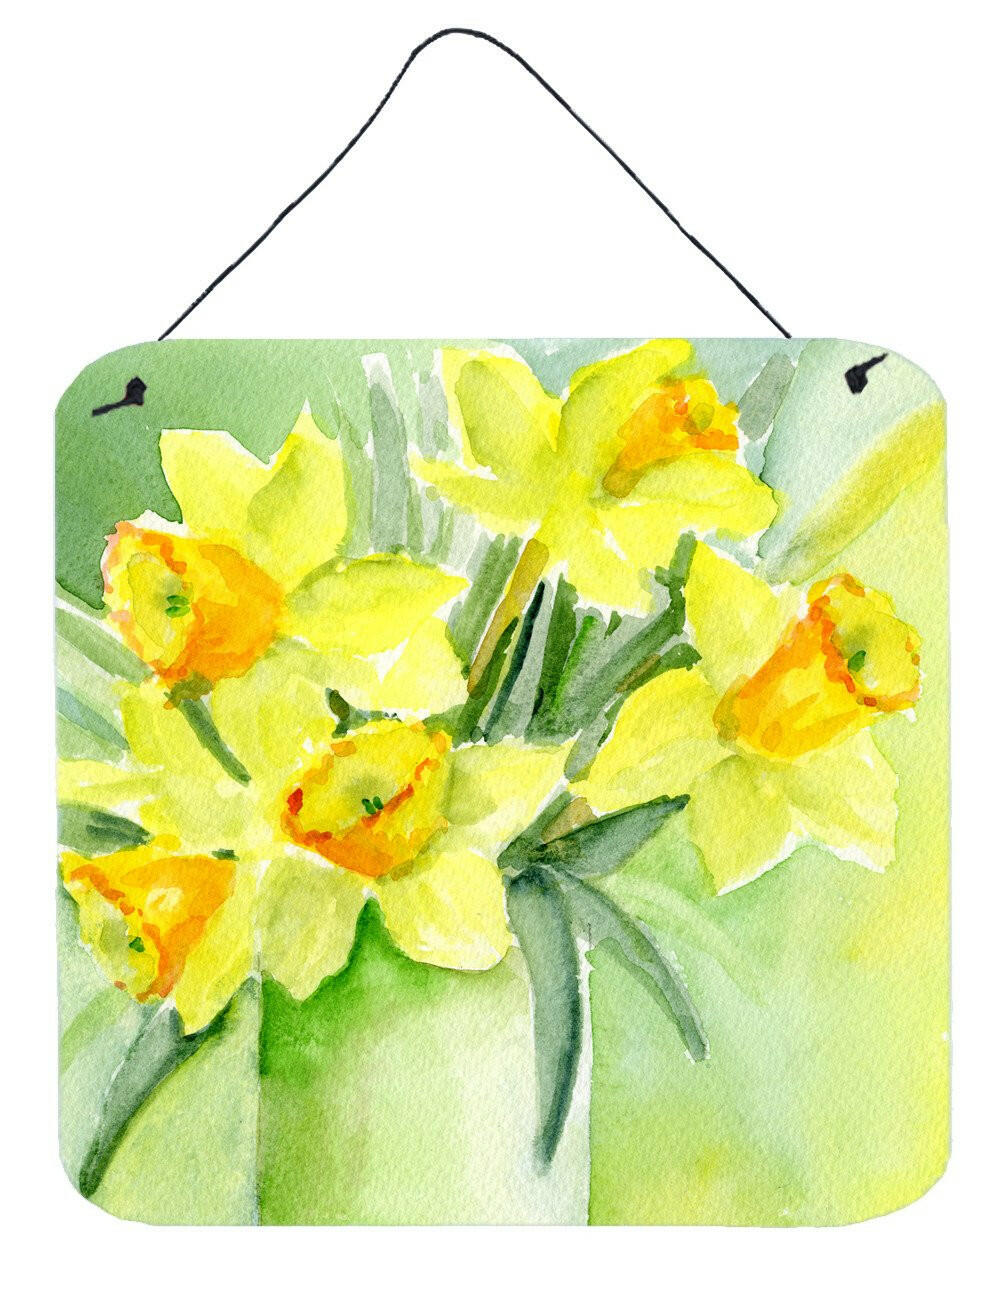 Daffodils by Maureen Bonfield Wall or Door Hanging Prints BMBO970ADS66 by Caroline's Treasures